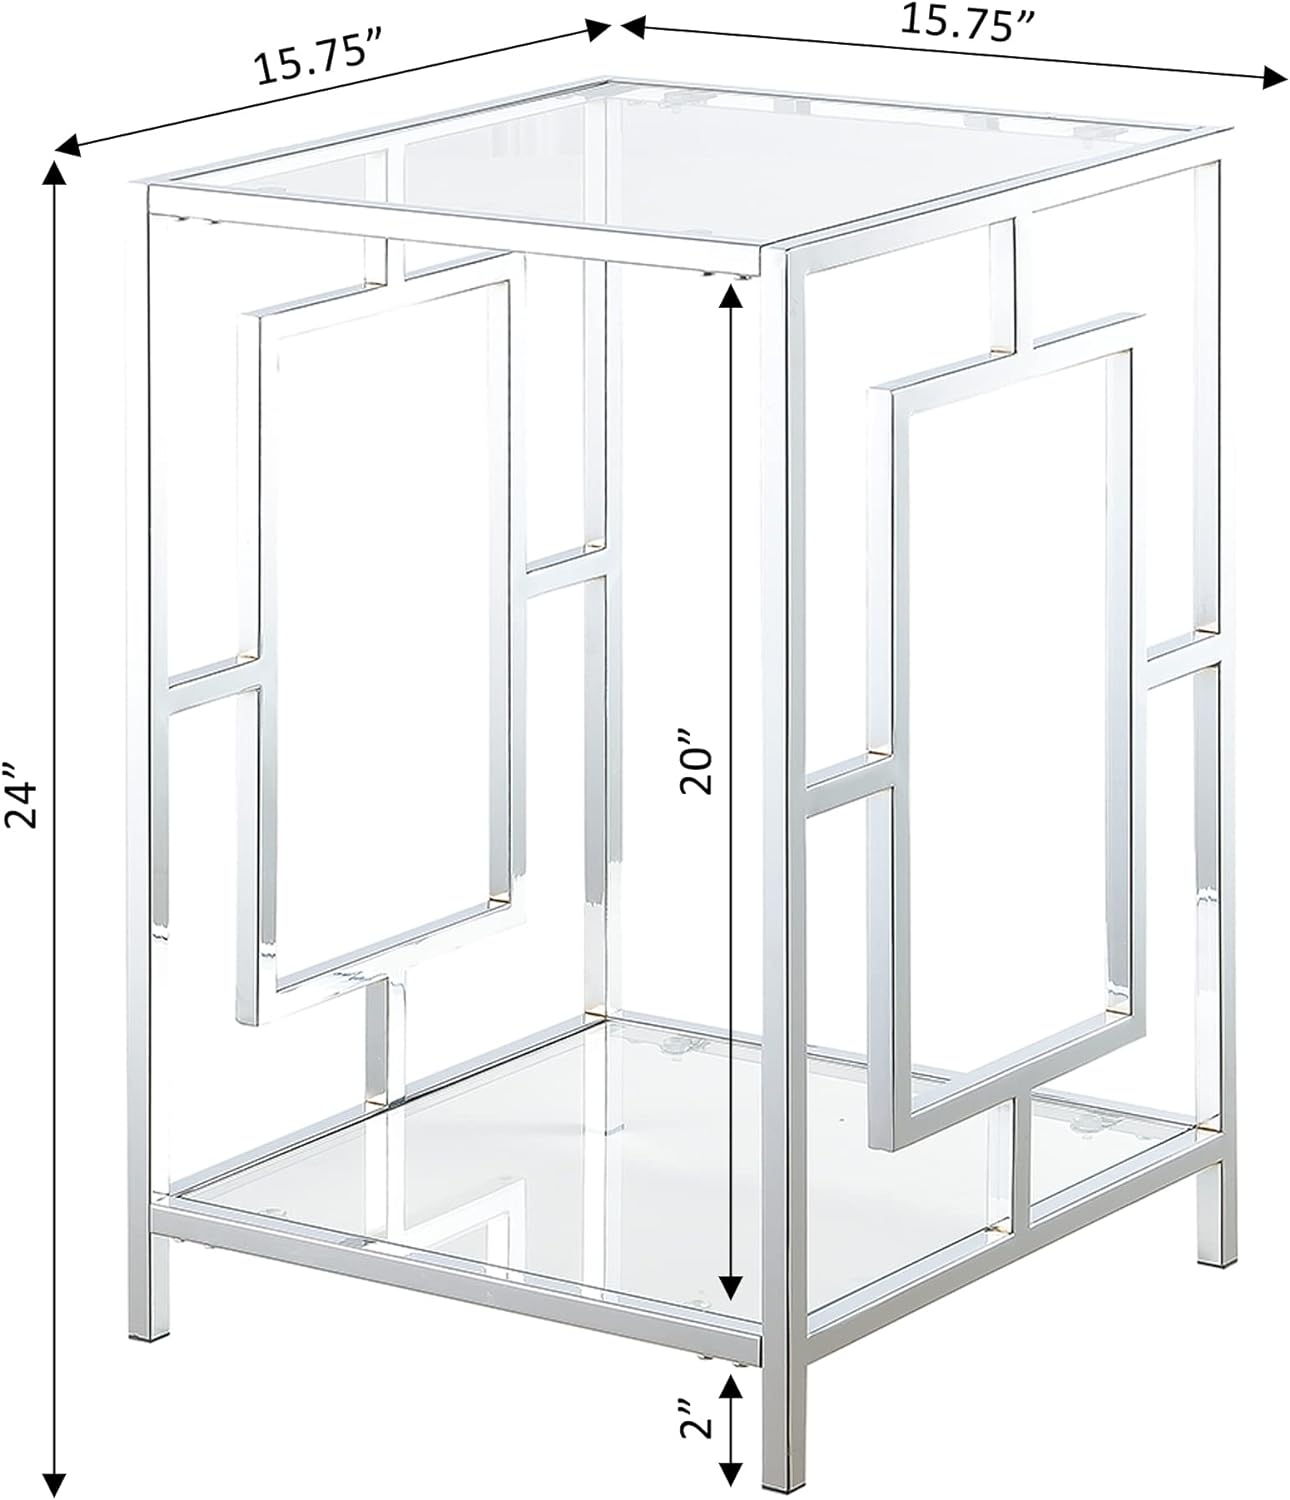 Convenience Concepts chrome end table with shelf dimensions